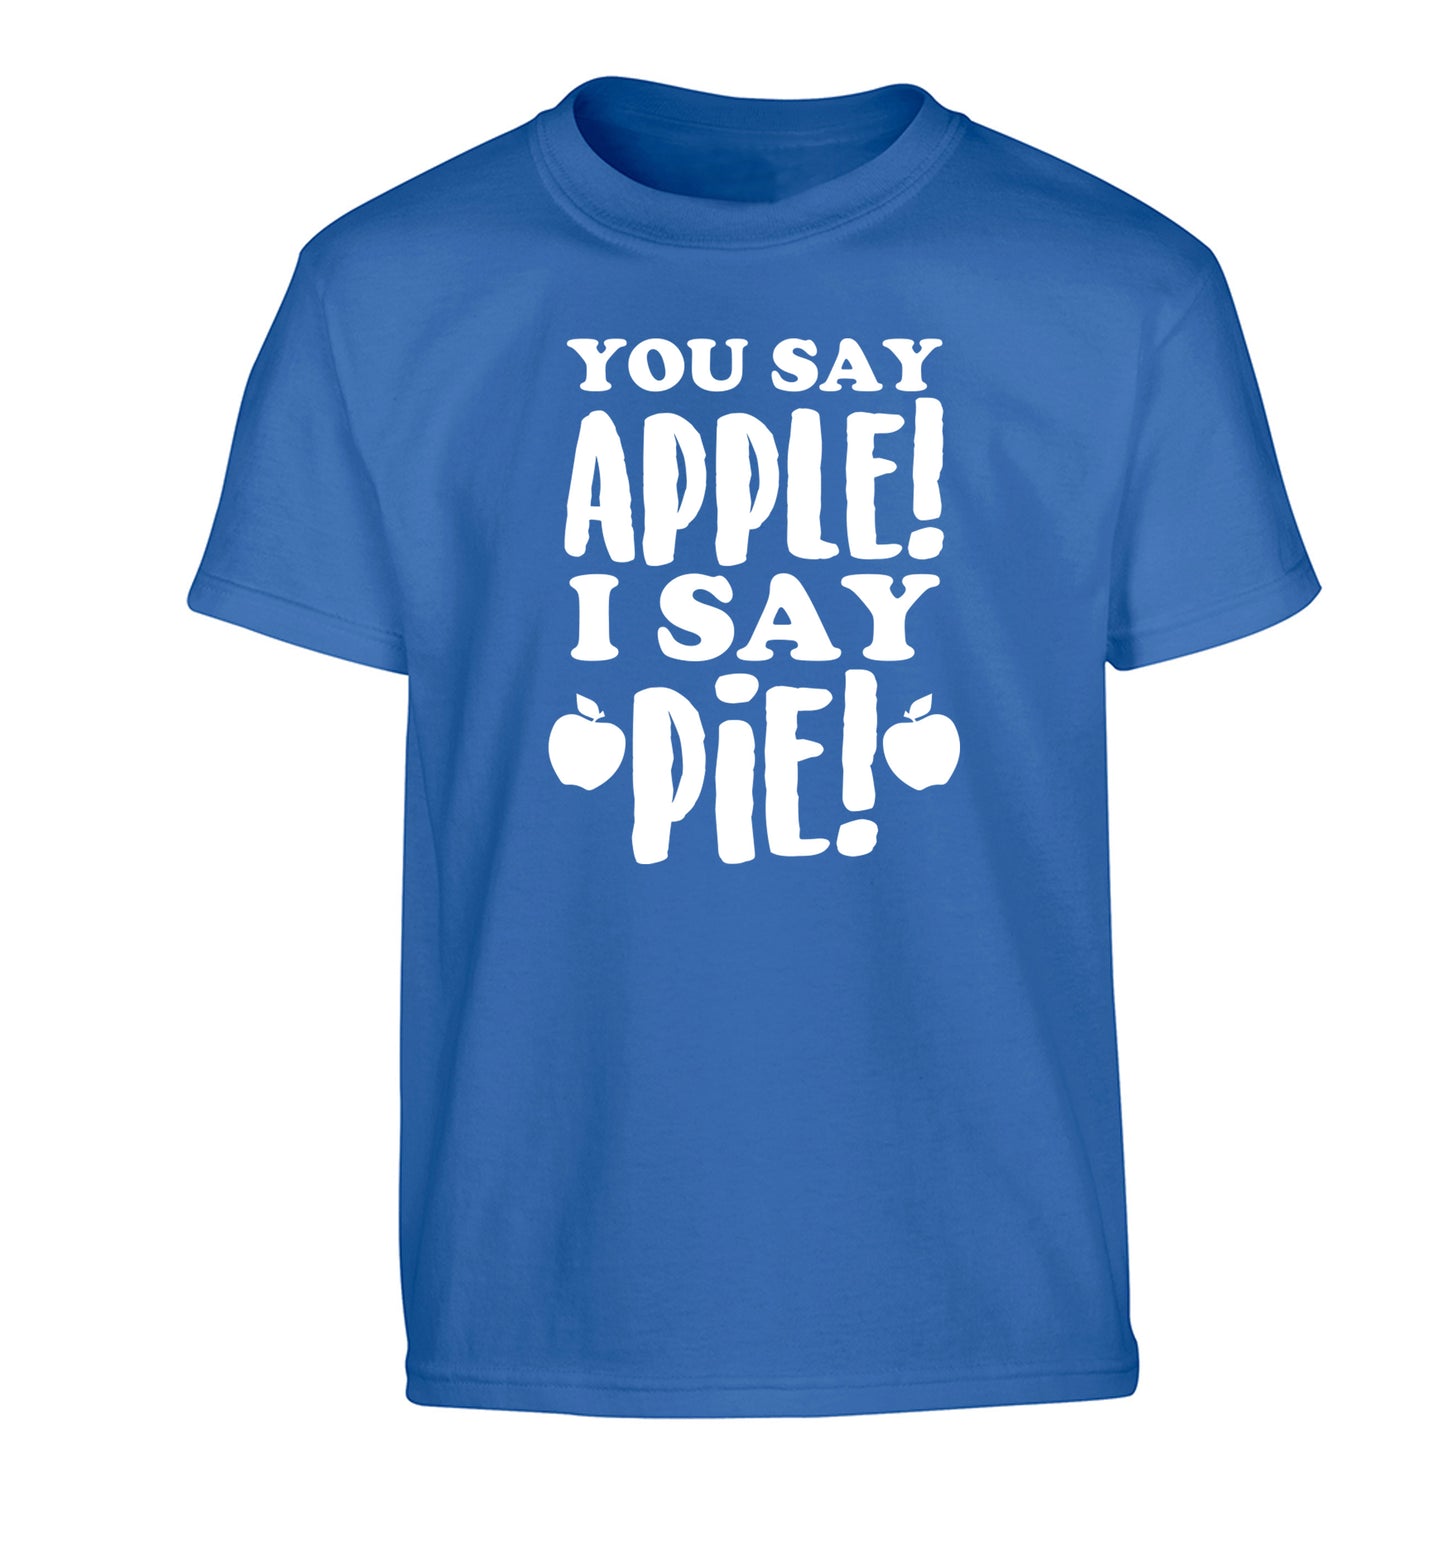 You say apple I say pie! Children's blue Tshirt 12-14 Years